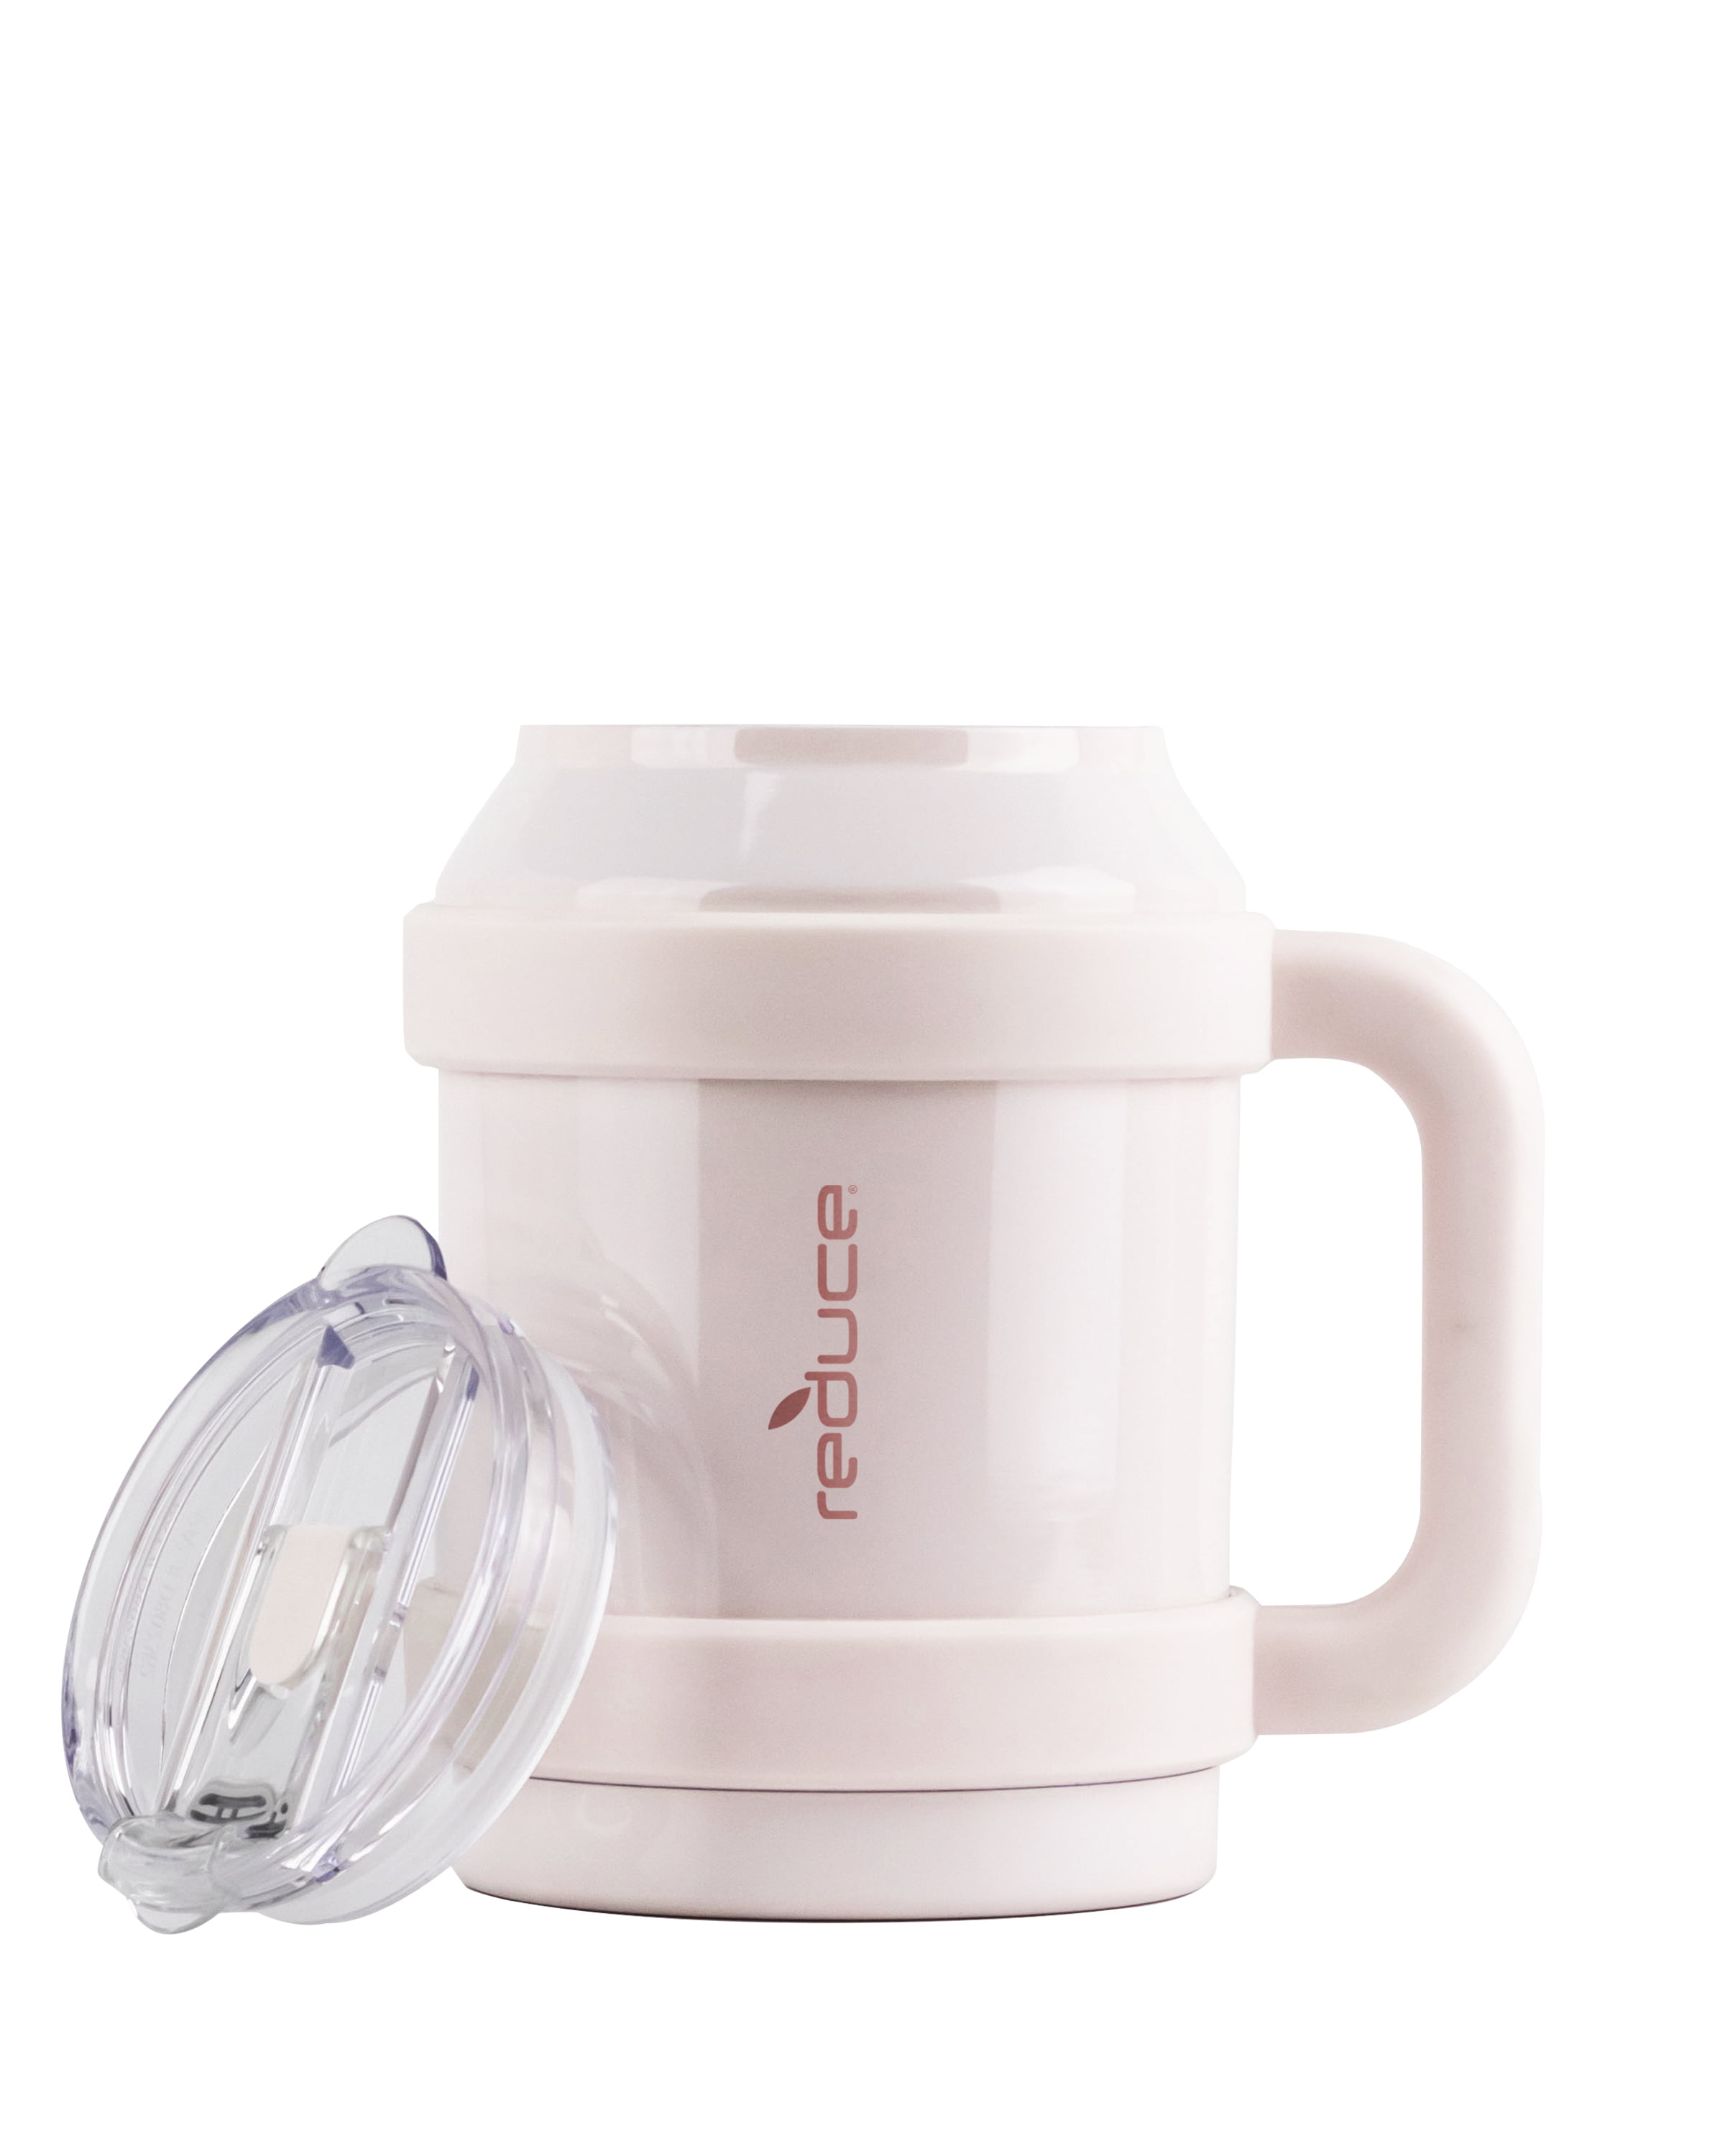 REDUCE brand Cold1 Tumblers or Mugs 20-24oz mouth Replacement Lid (3.5 inch  diameter) and Straw (10.6 inch) set, Clear, BPA Free, Dishwasher safe